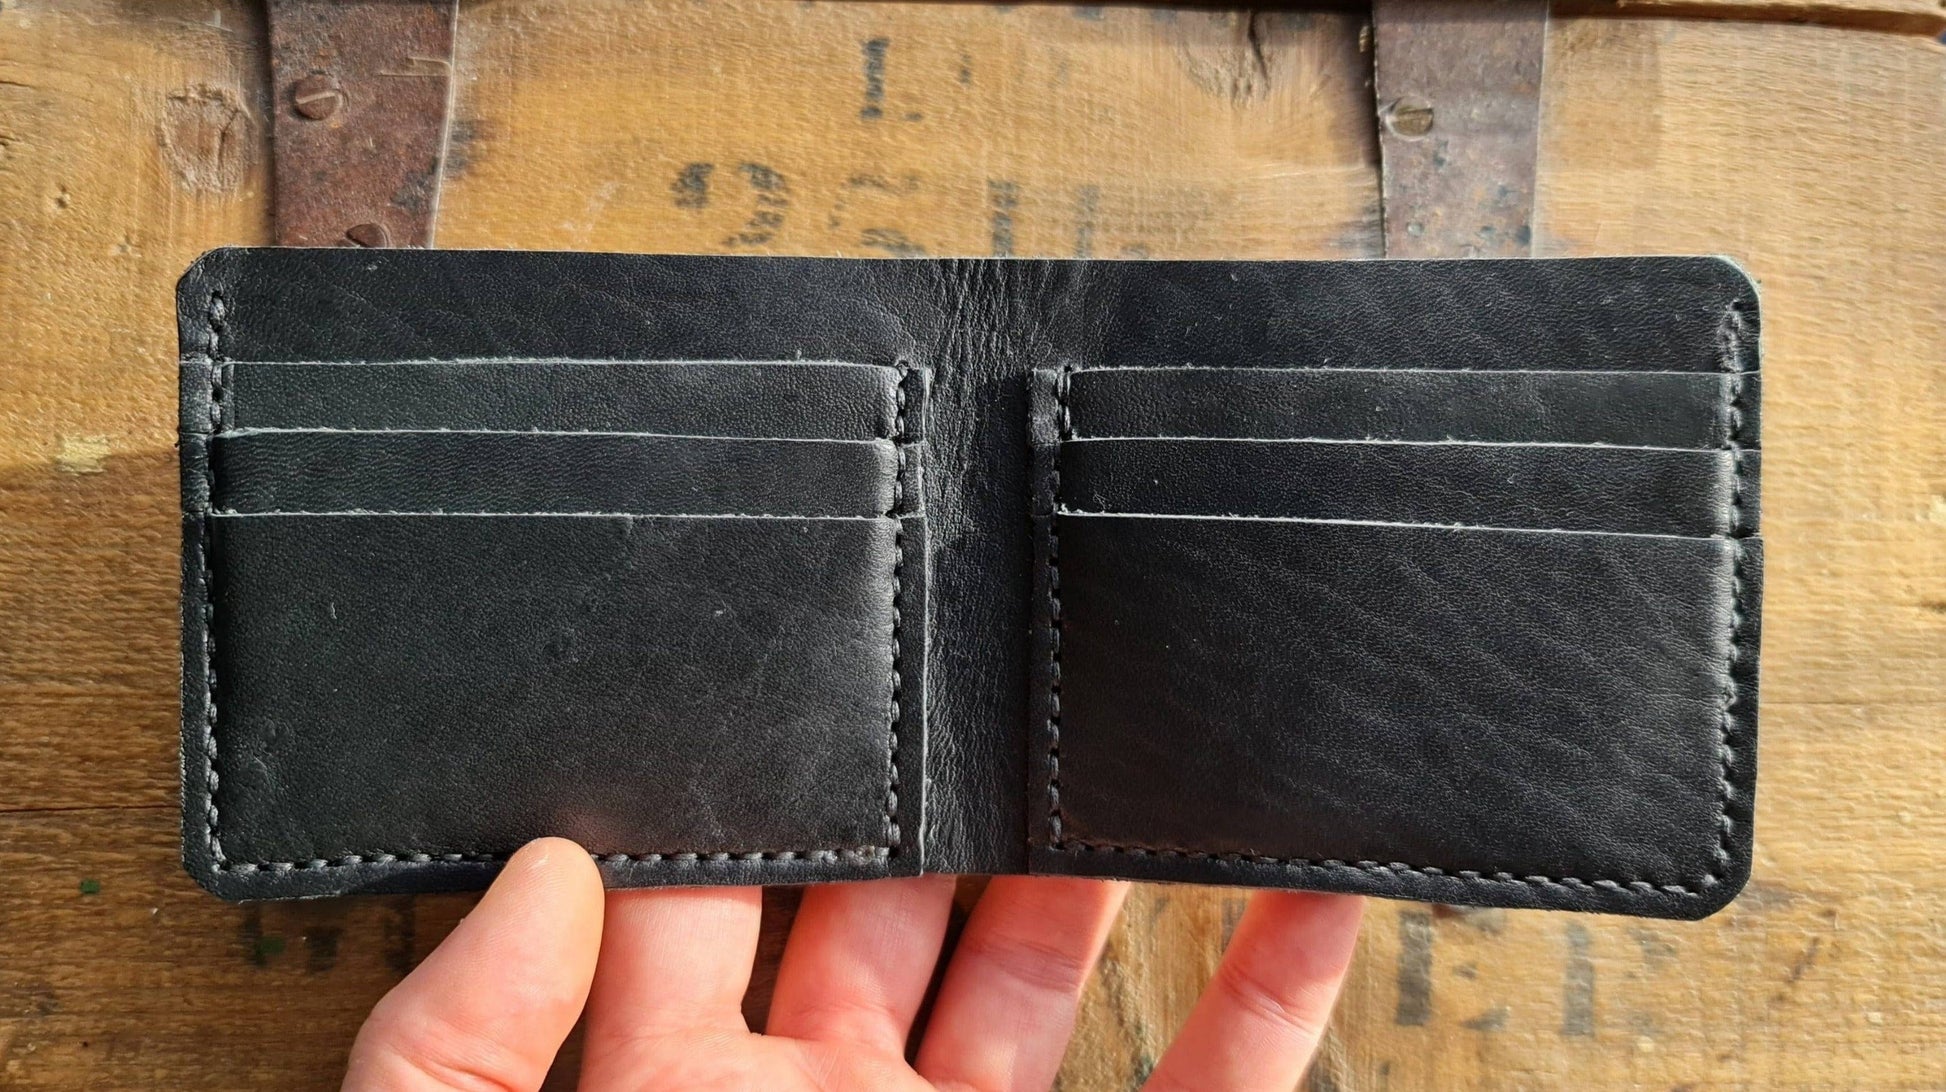 No. 2 Frontiersman Leather Bifold Wallet, Horween Black Dublin Leather, Front Open